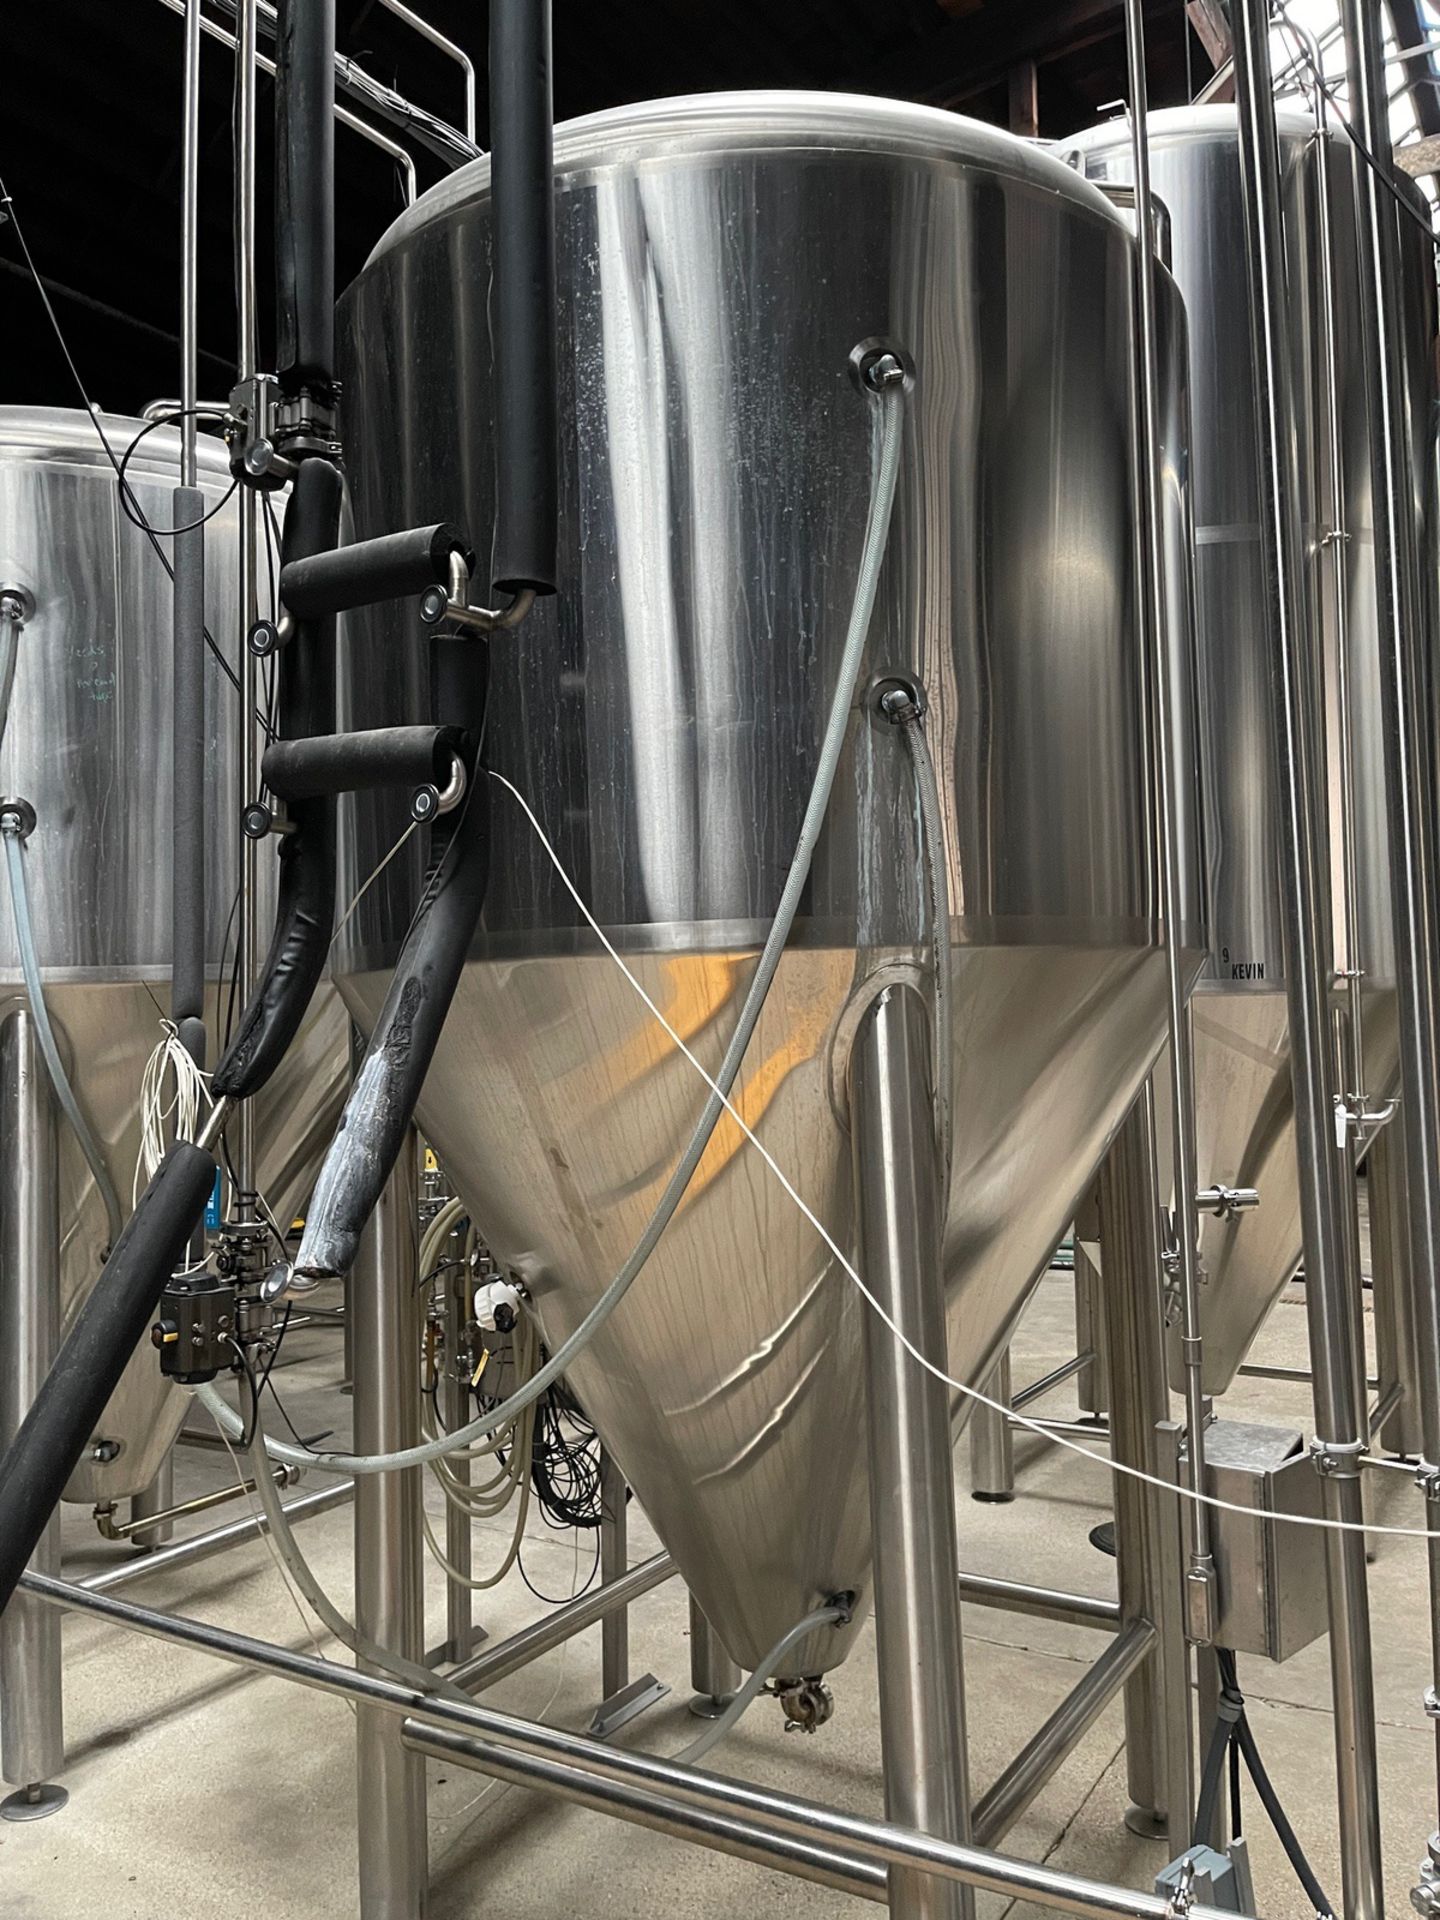 2013 - 30 BBL G.W. Kent Stainless Steel Fermentation Tank, Cone Bottom, Glycol Jacke | Rig Fee $1150 - Image 2 of 3